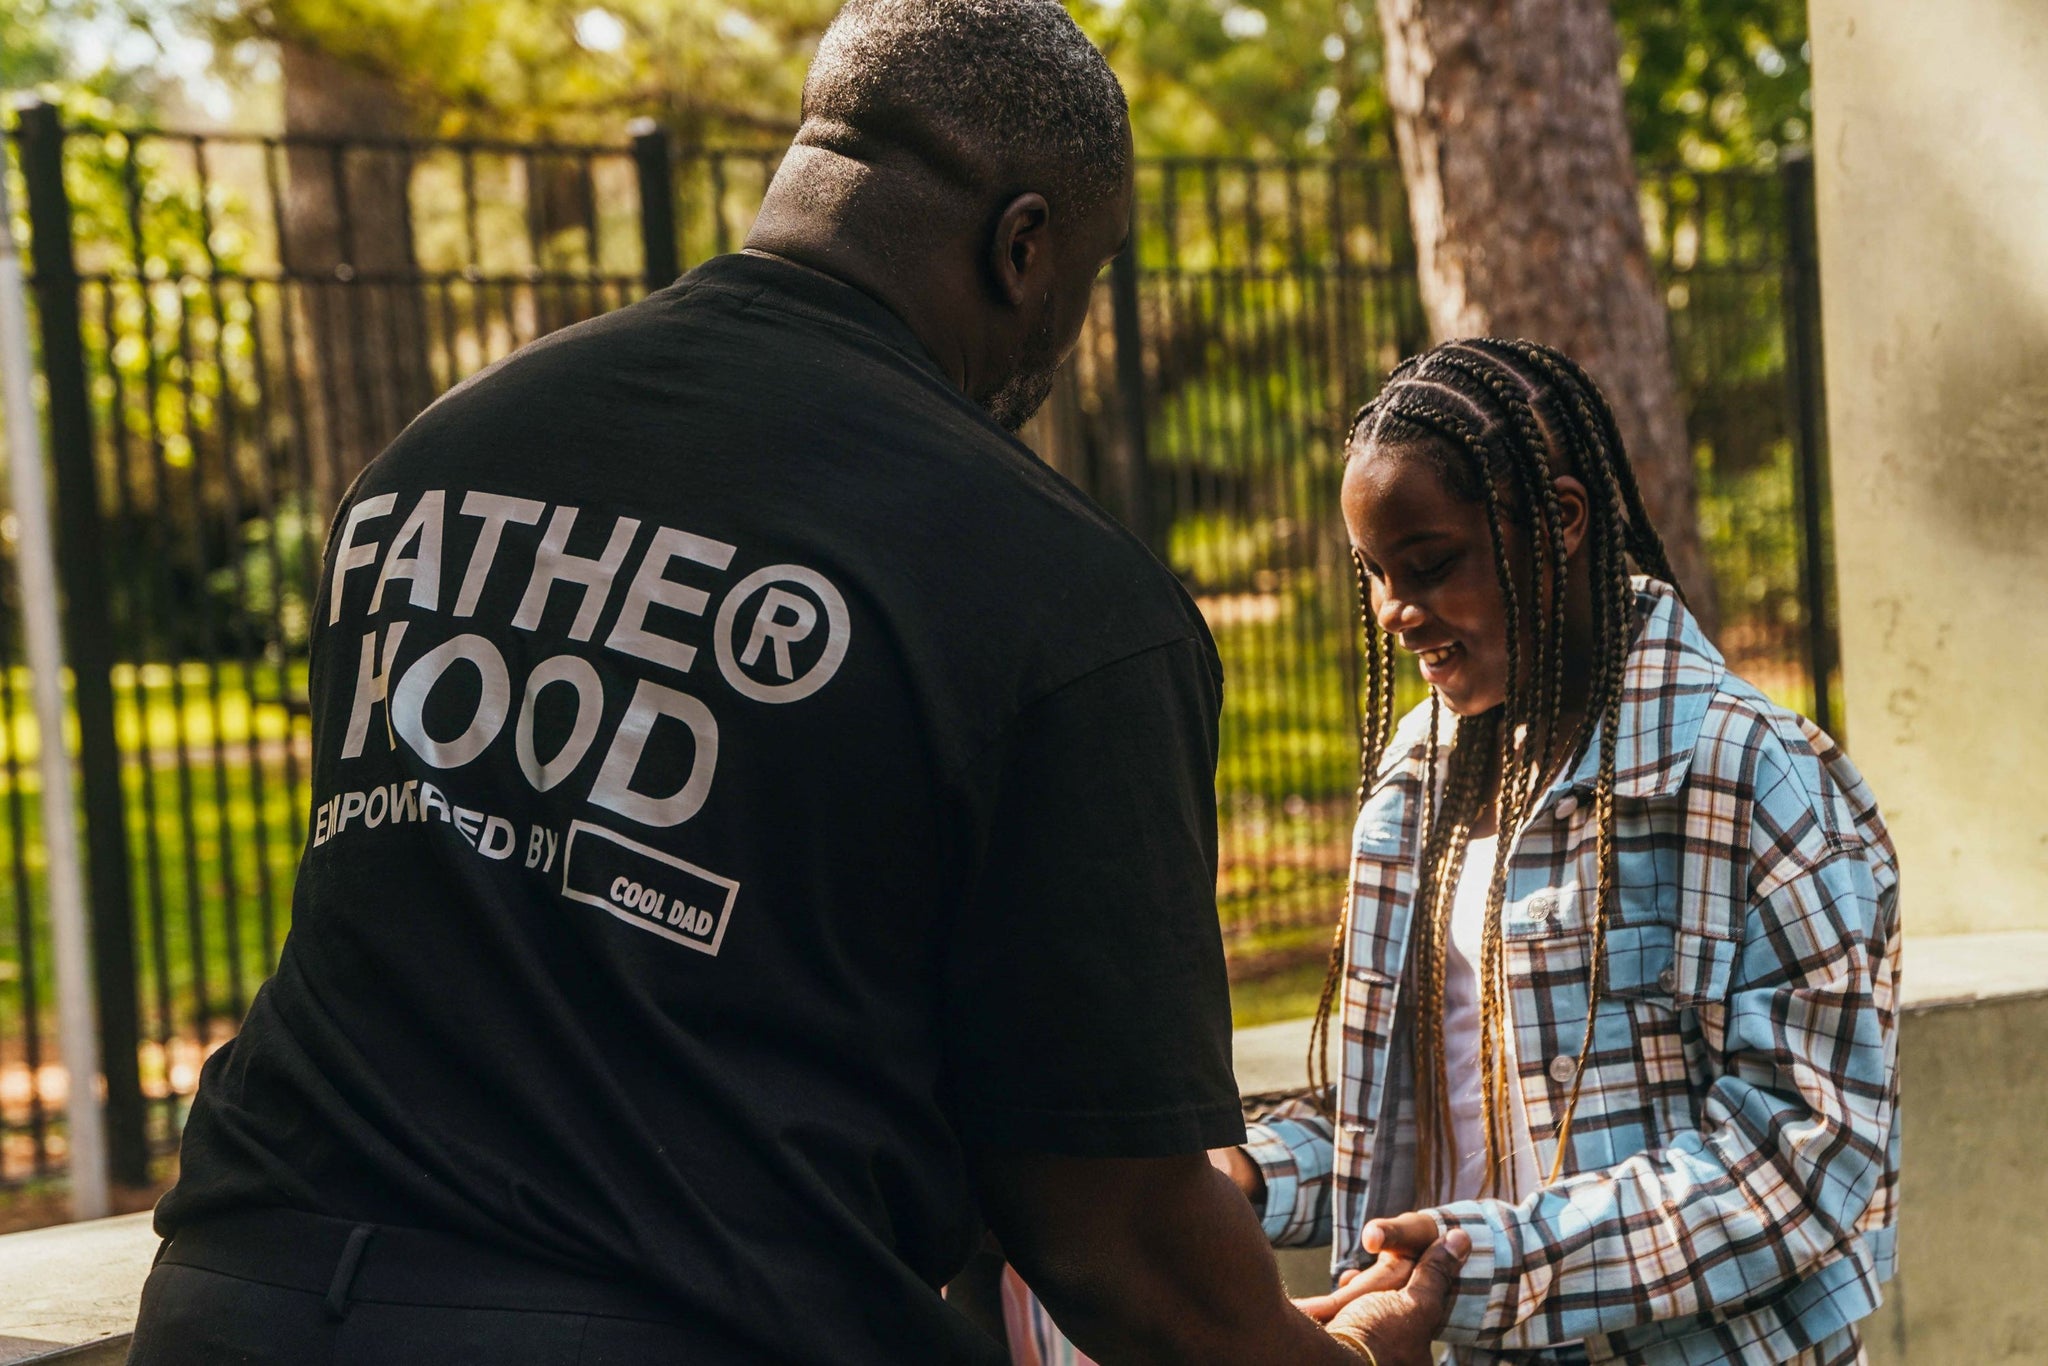 The back of Fred's torso. He's wearing a shirt that says "FATHER HOOD" with the r in the symbol of the registered trademark sign. He has his hands out toward his daughter, who has on a blue checkered shirt and is wearing braids. They appear to be playing a hand game, like paddycake. She's smiling.